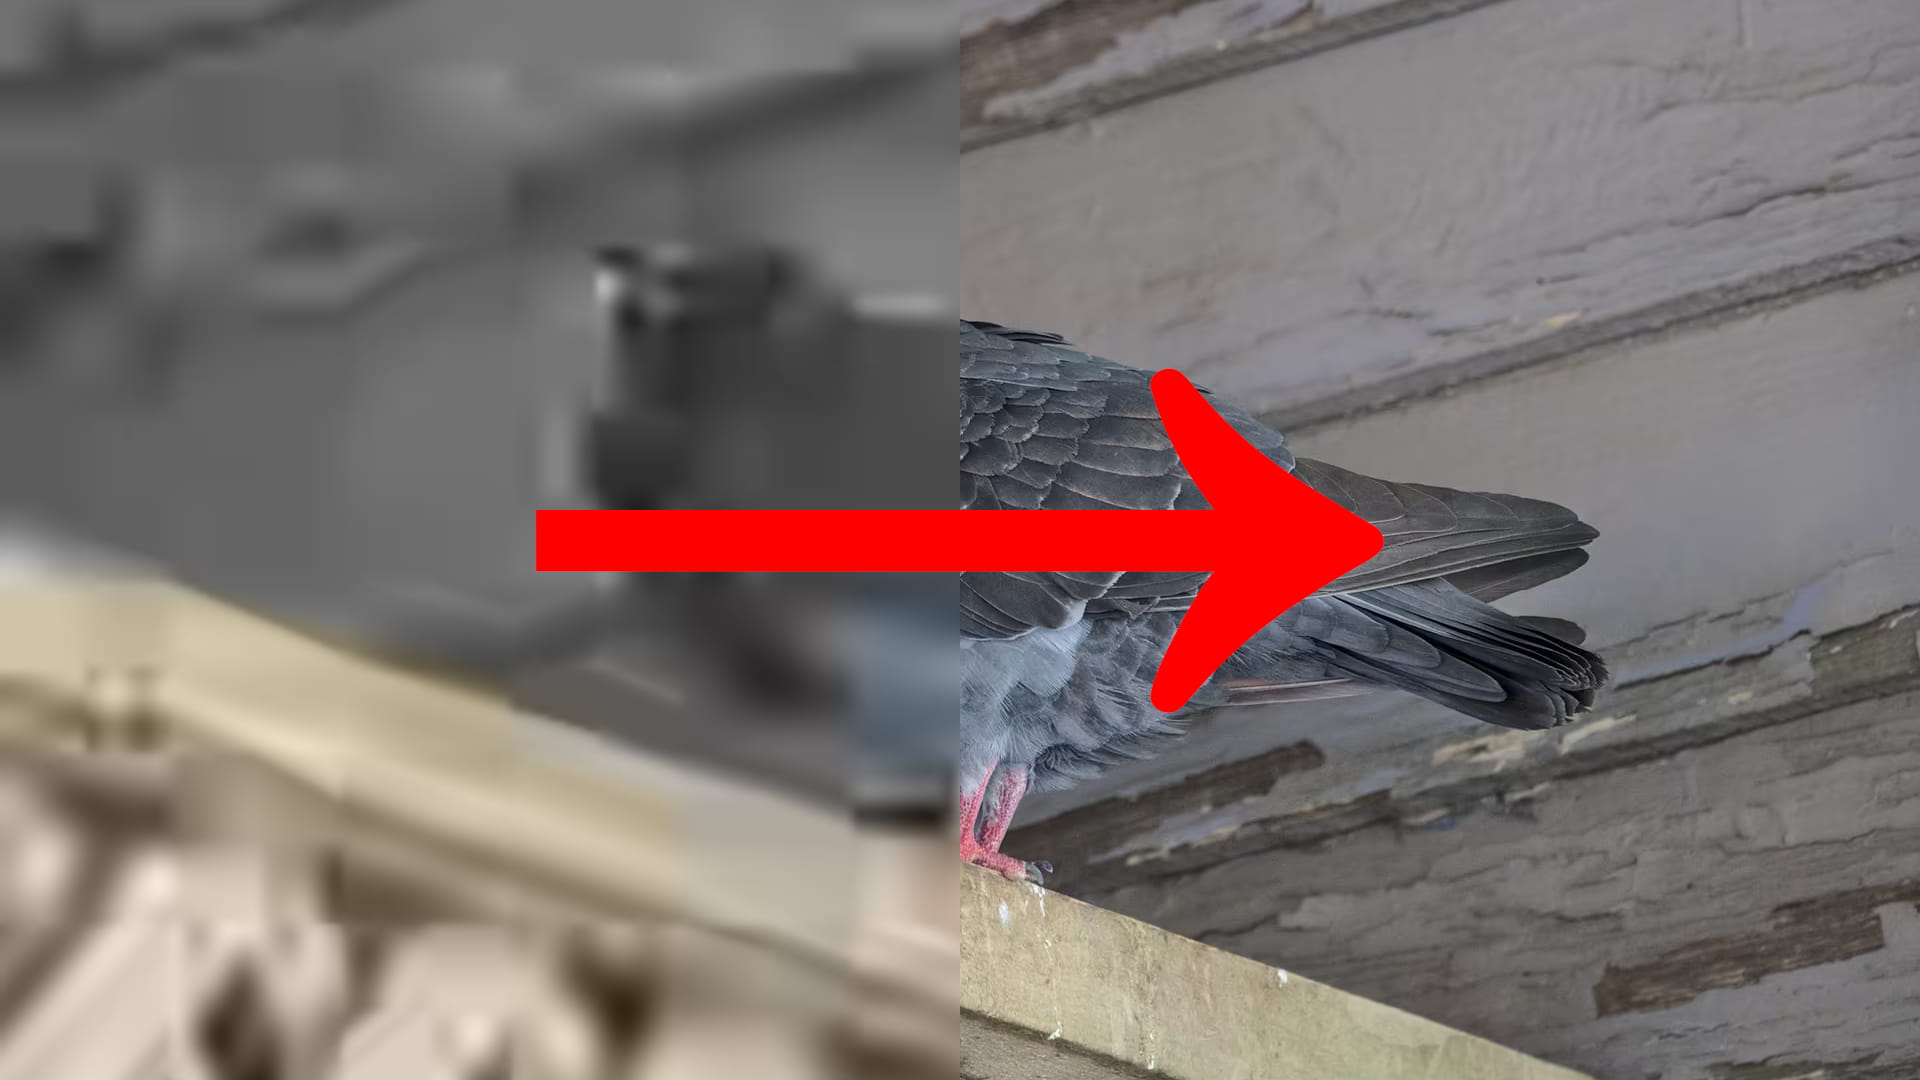 An image of a pigeon where half of it is super low quality with a red arrow pointing from the low quality to the high quality part